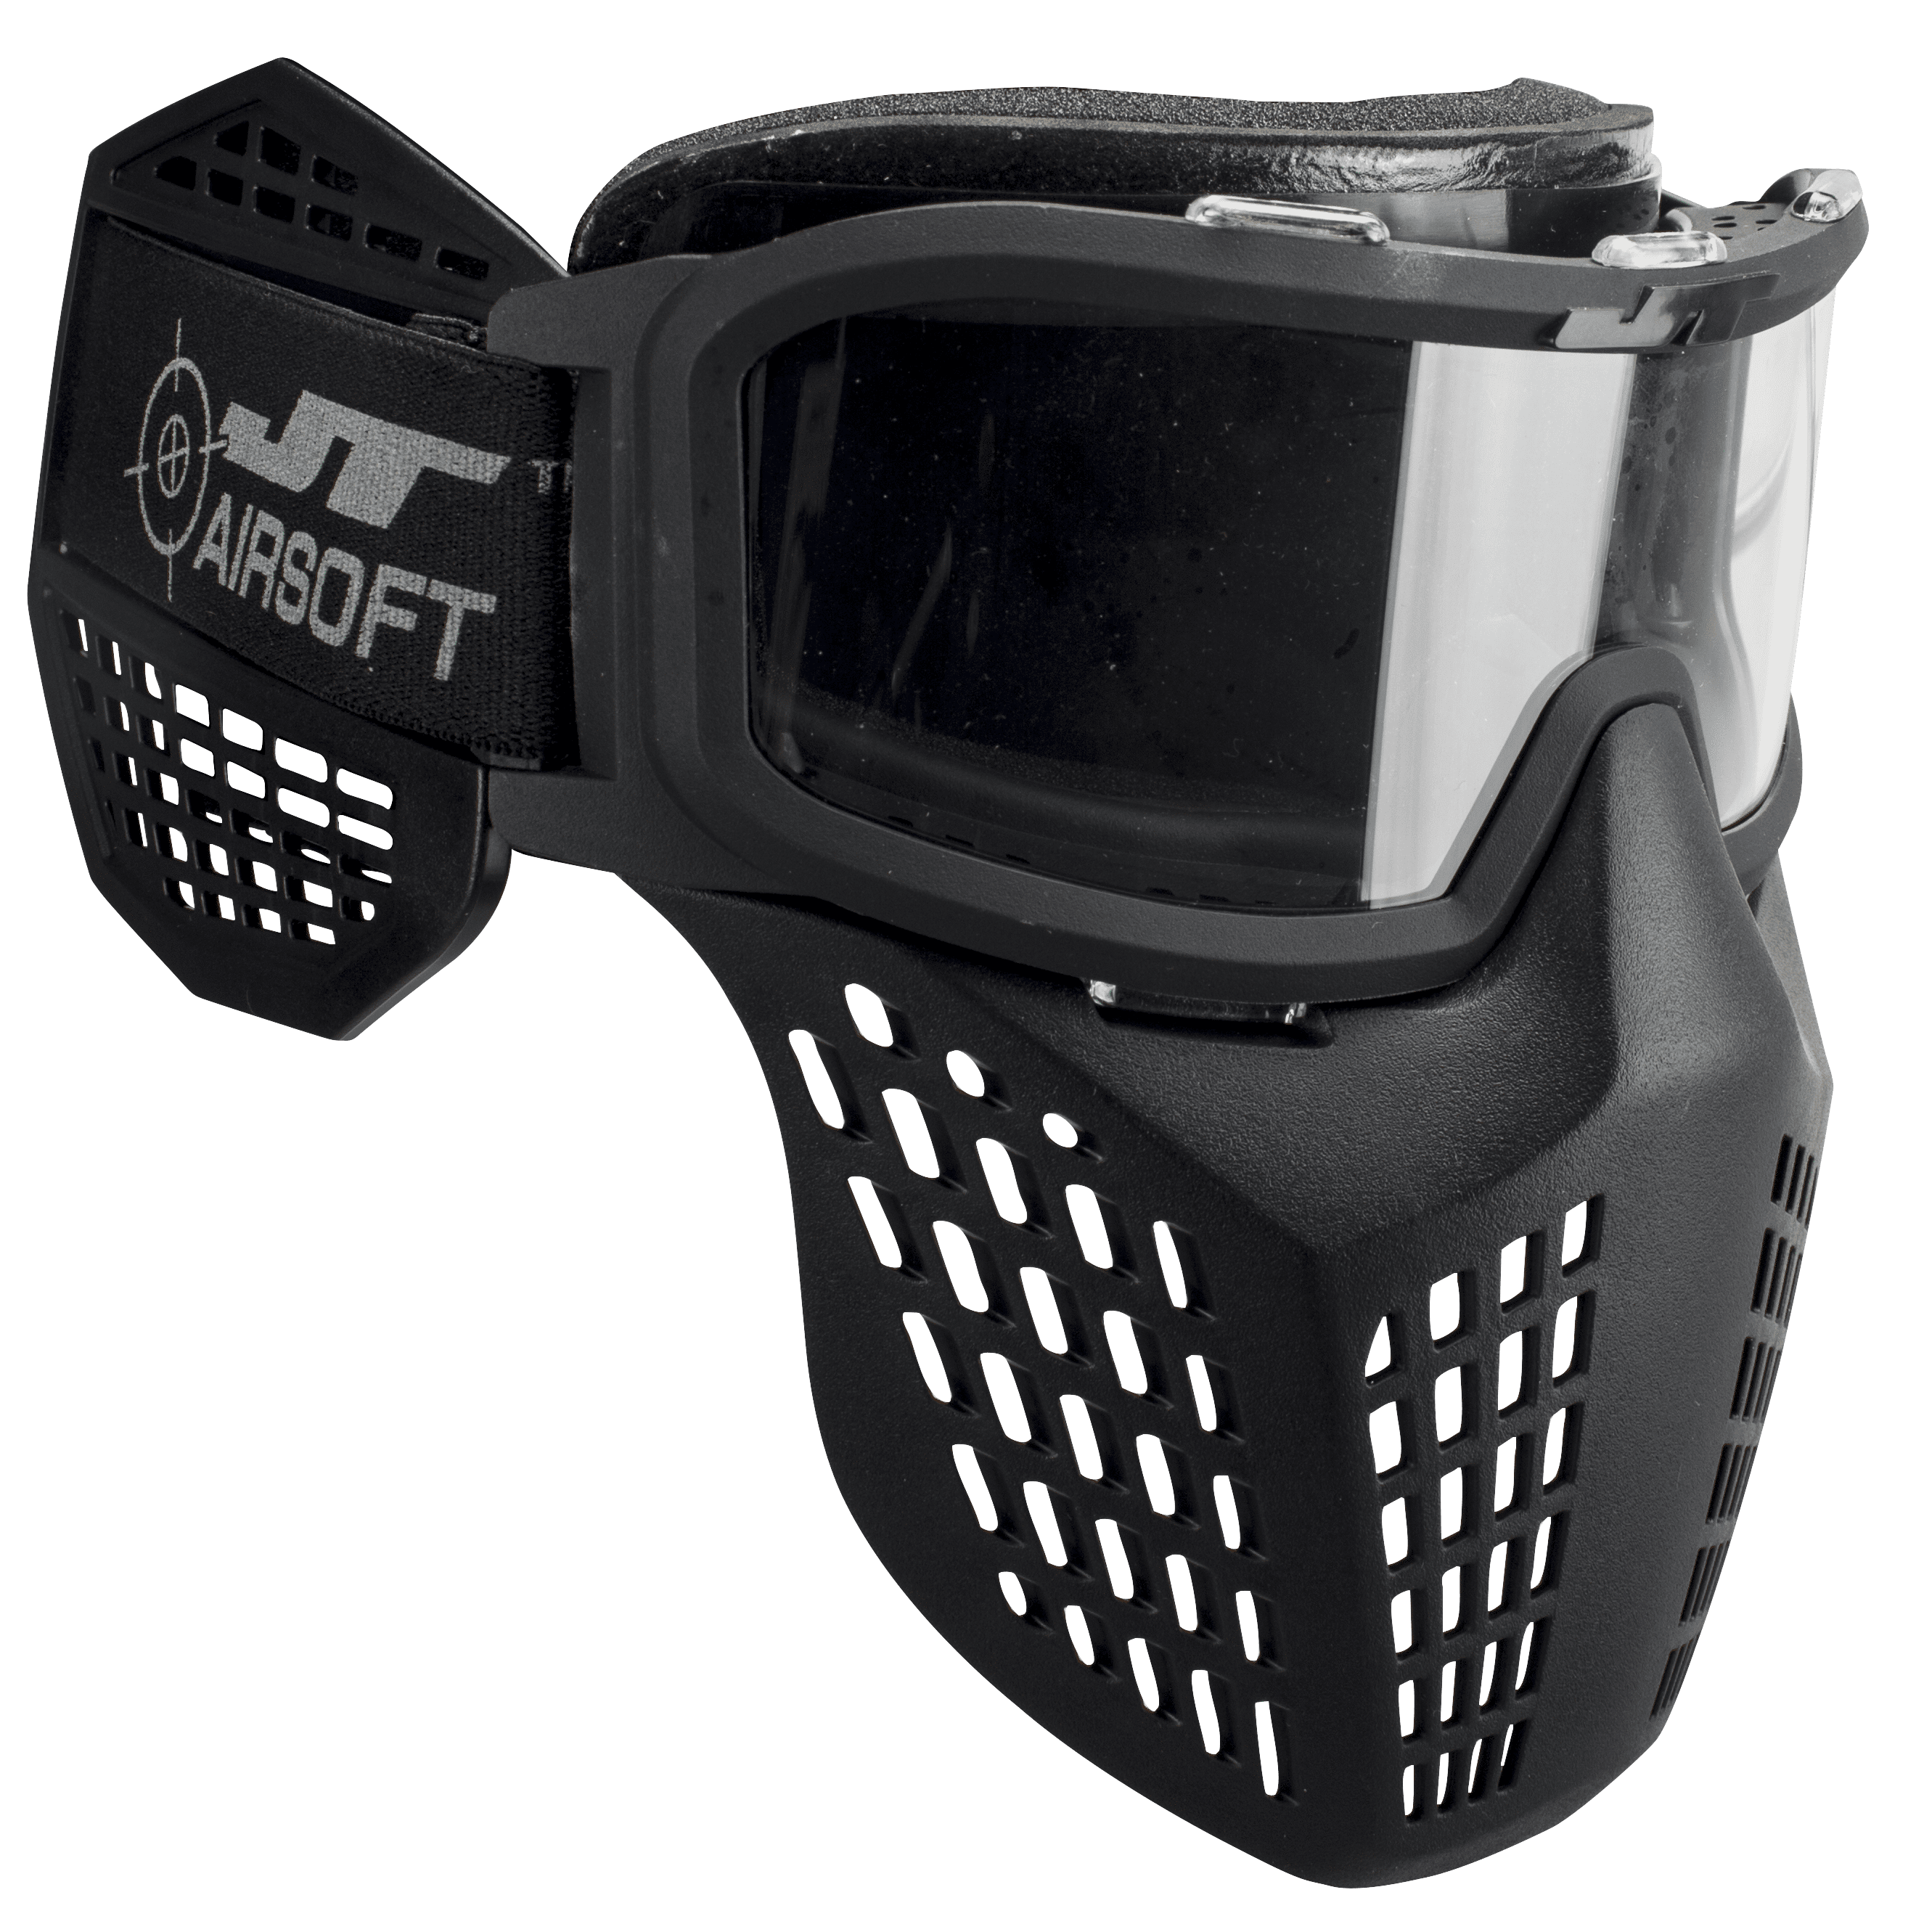 JT Delta 3 Safety Mask for Airsoft, Gel Beads, Blasters and Foam